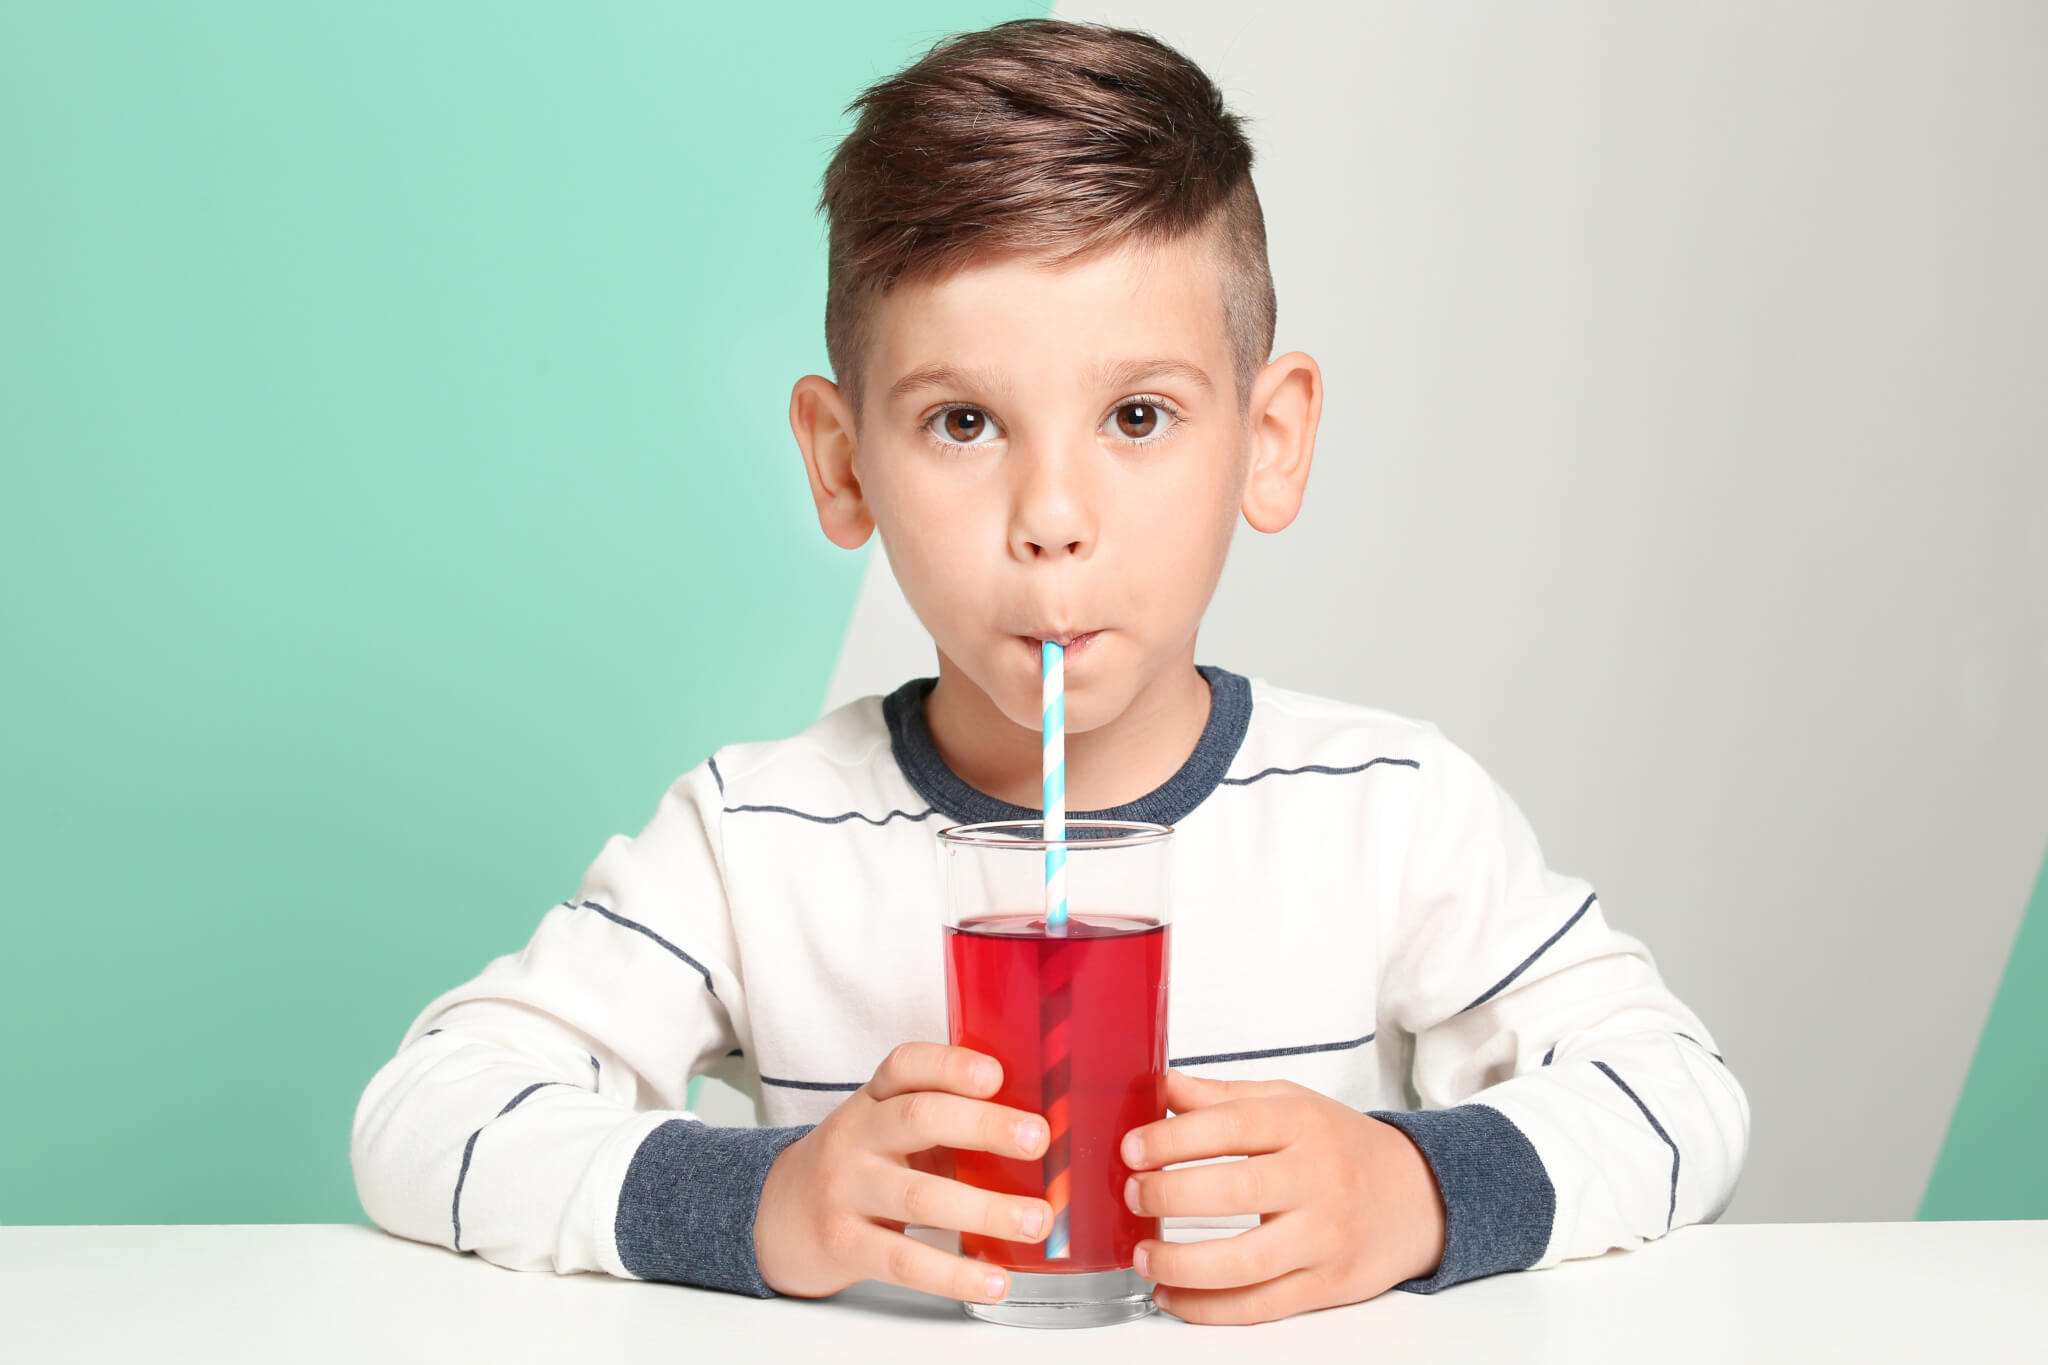 Boy drinking fruit juice or sugary drink in glass